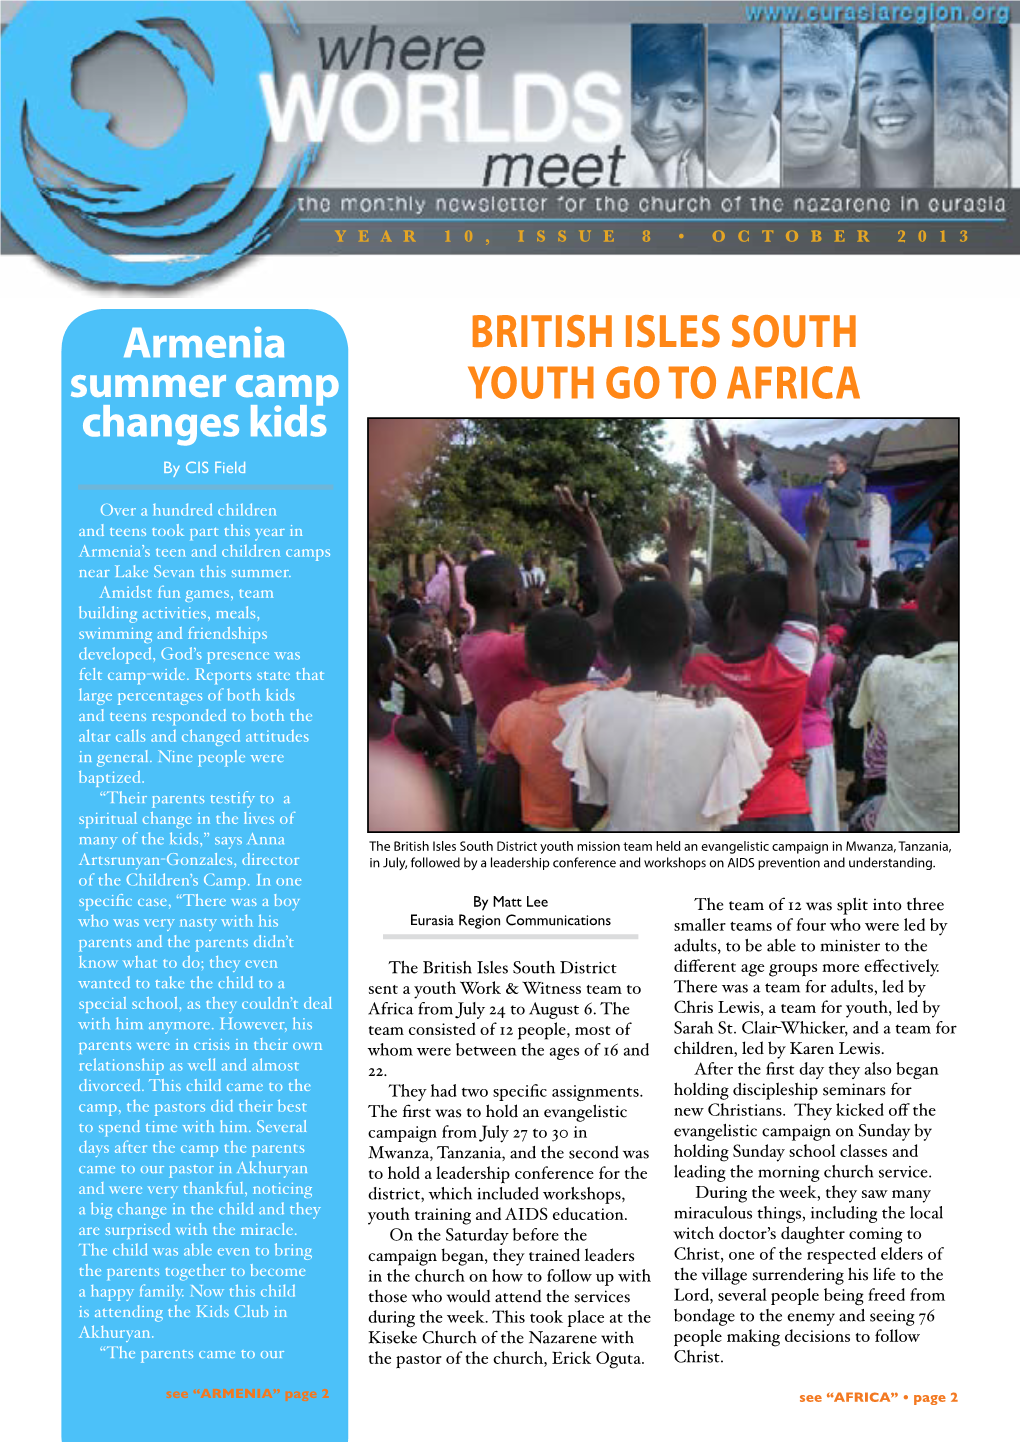 British Isles South Youth Go to Africa